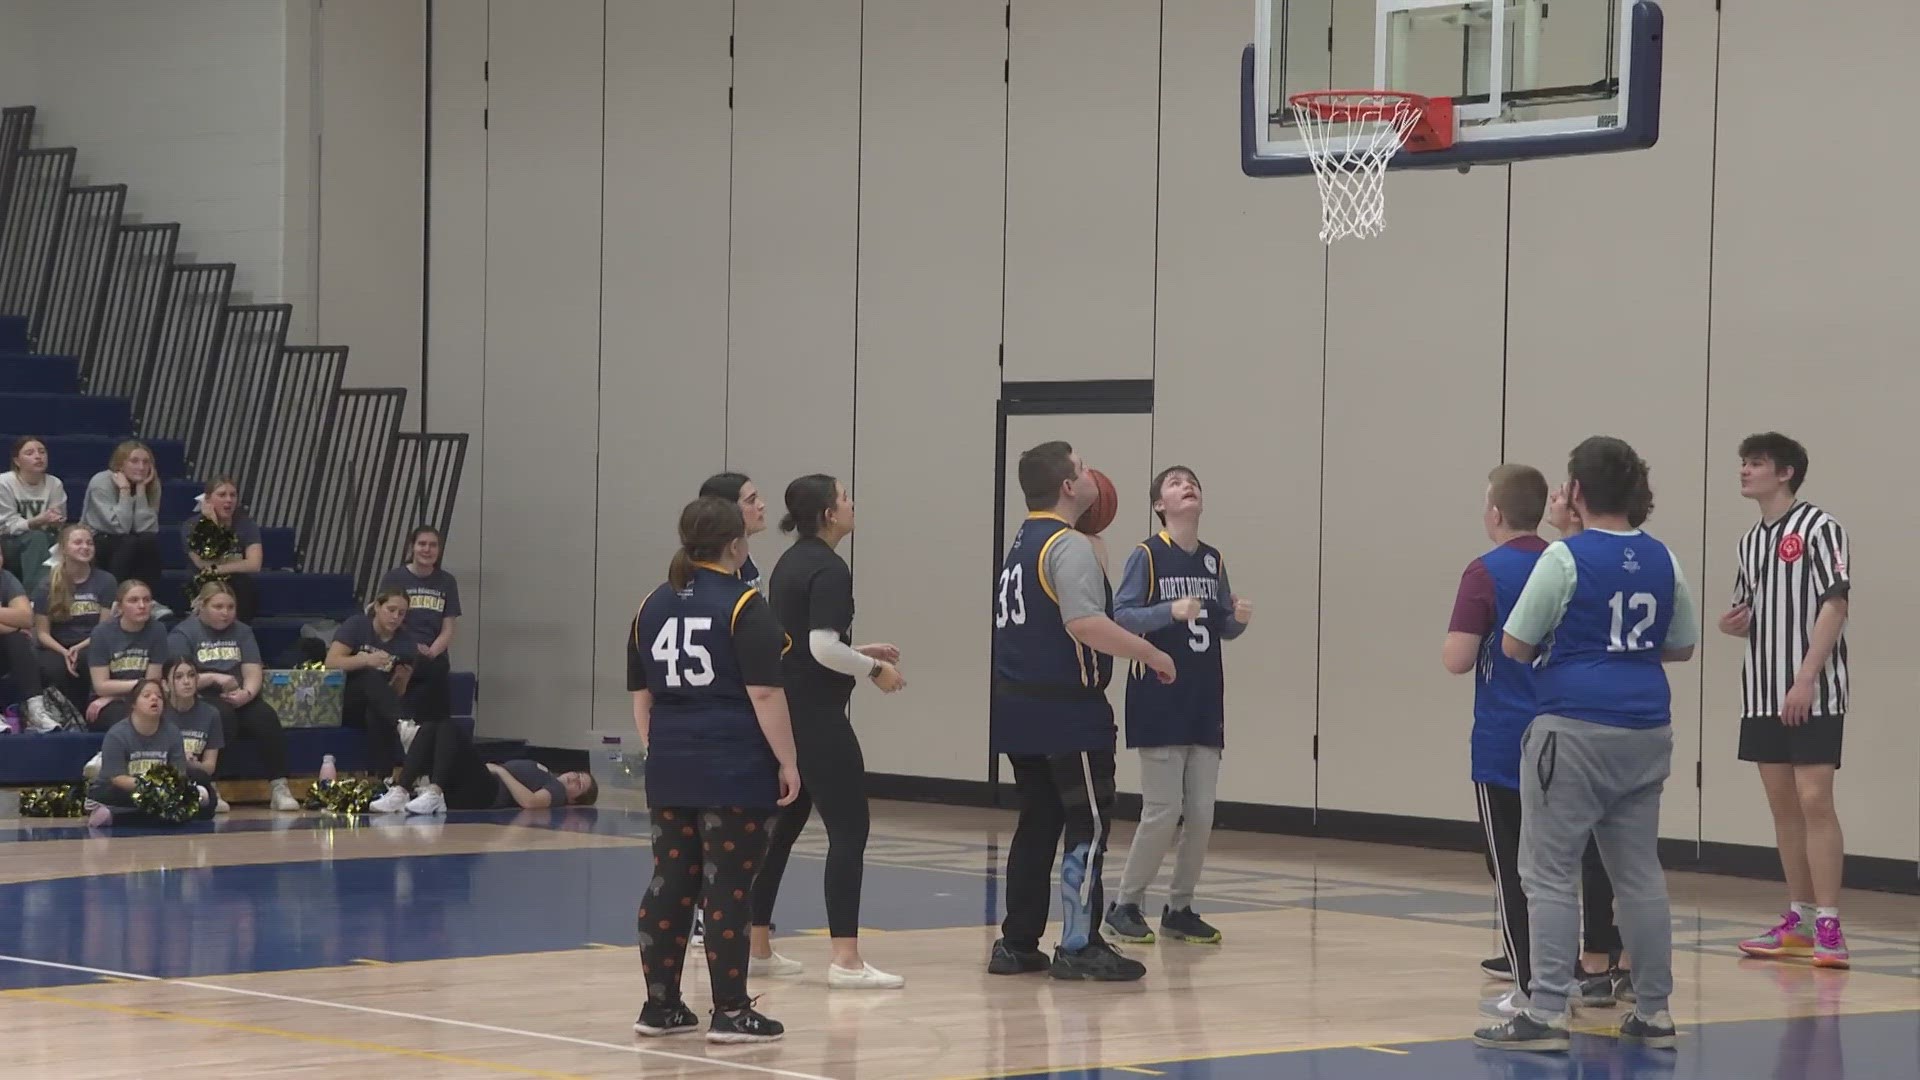 Players of varying abilities from schools across Northeast Ohio gathered in North Ridgeville Thursday for a Unified Sports basketball tournament.